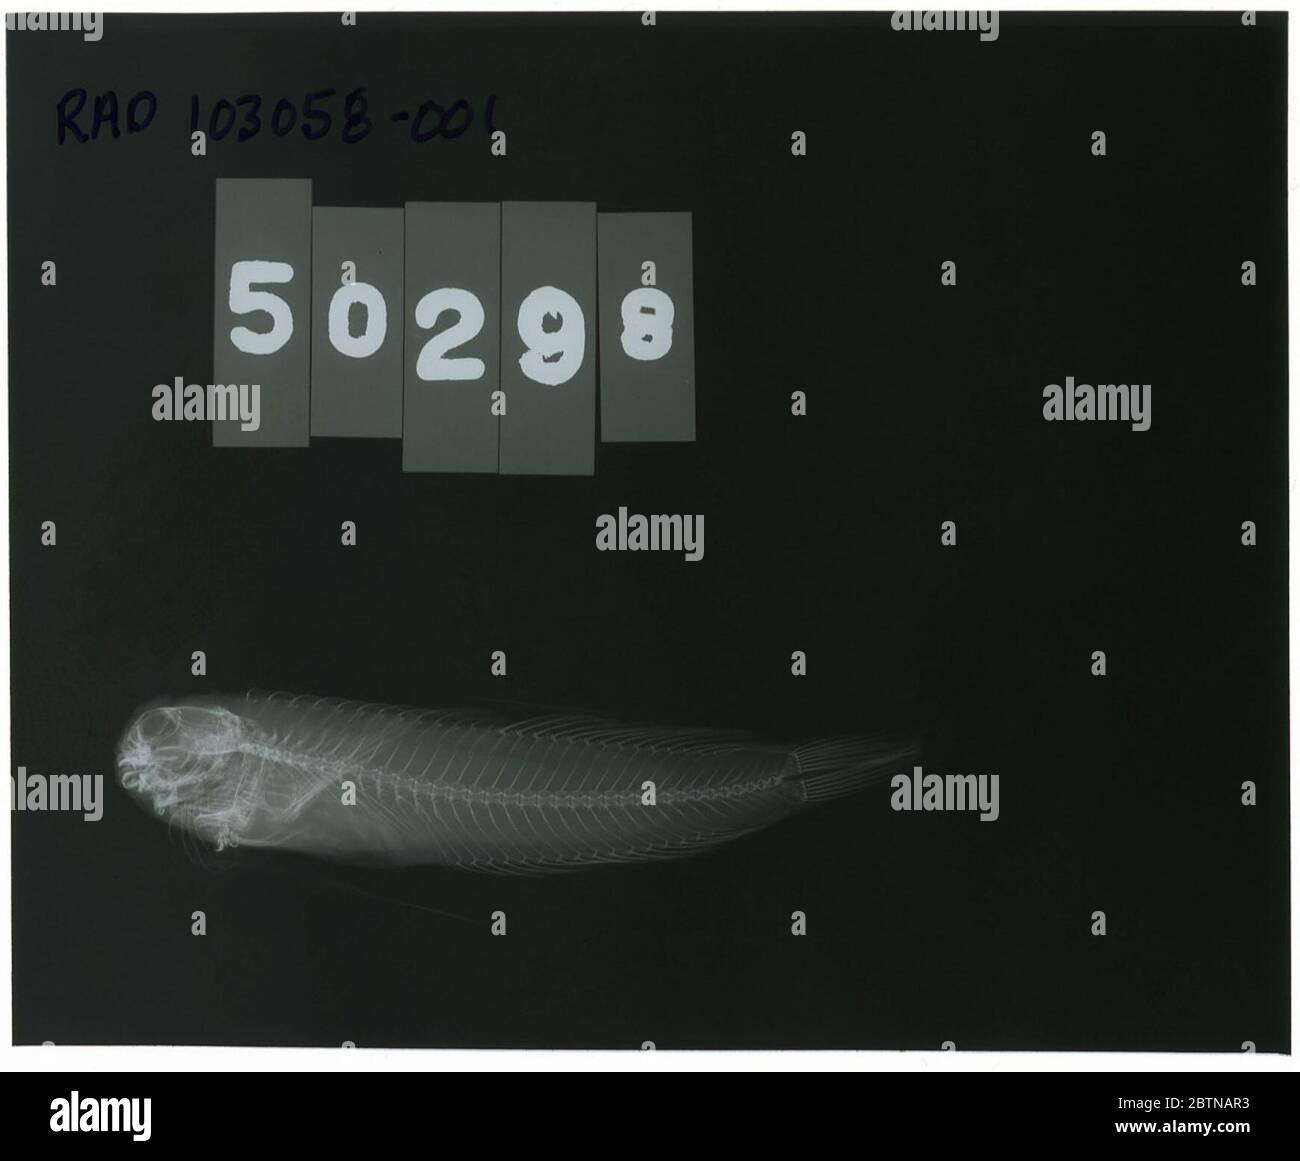 Scartichthys stellifer Jordan Synder. Radiograph is of a paratype; The Smithsonian NMNH Division of Fishes uses the convention of maintaining the original species name for type specimens designated at the time of description. The currently accepted name for this species is Entomacrodus stellifer.25 Oct 20181 Stock Photo